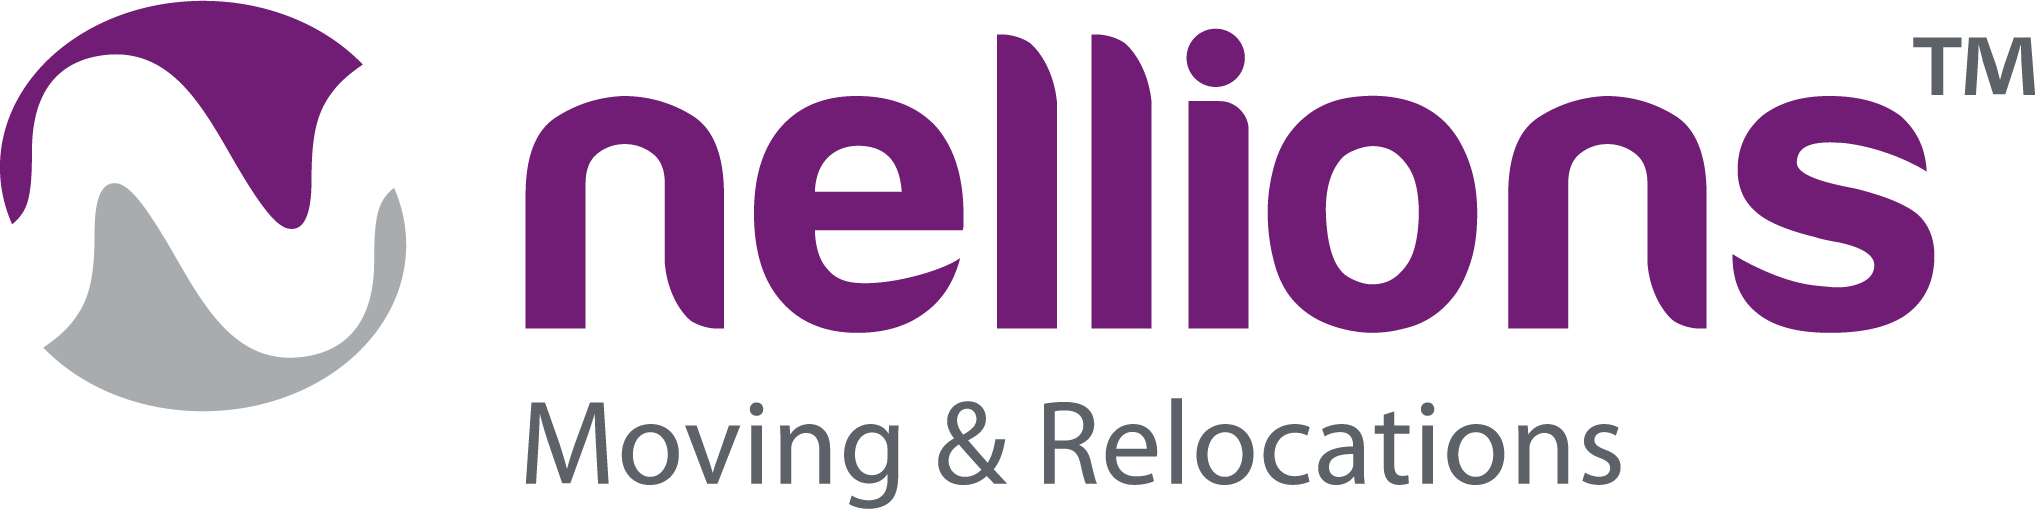 Nellions Moving & Relocations -  Best Movers in Uganda